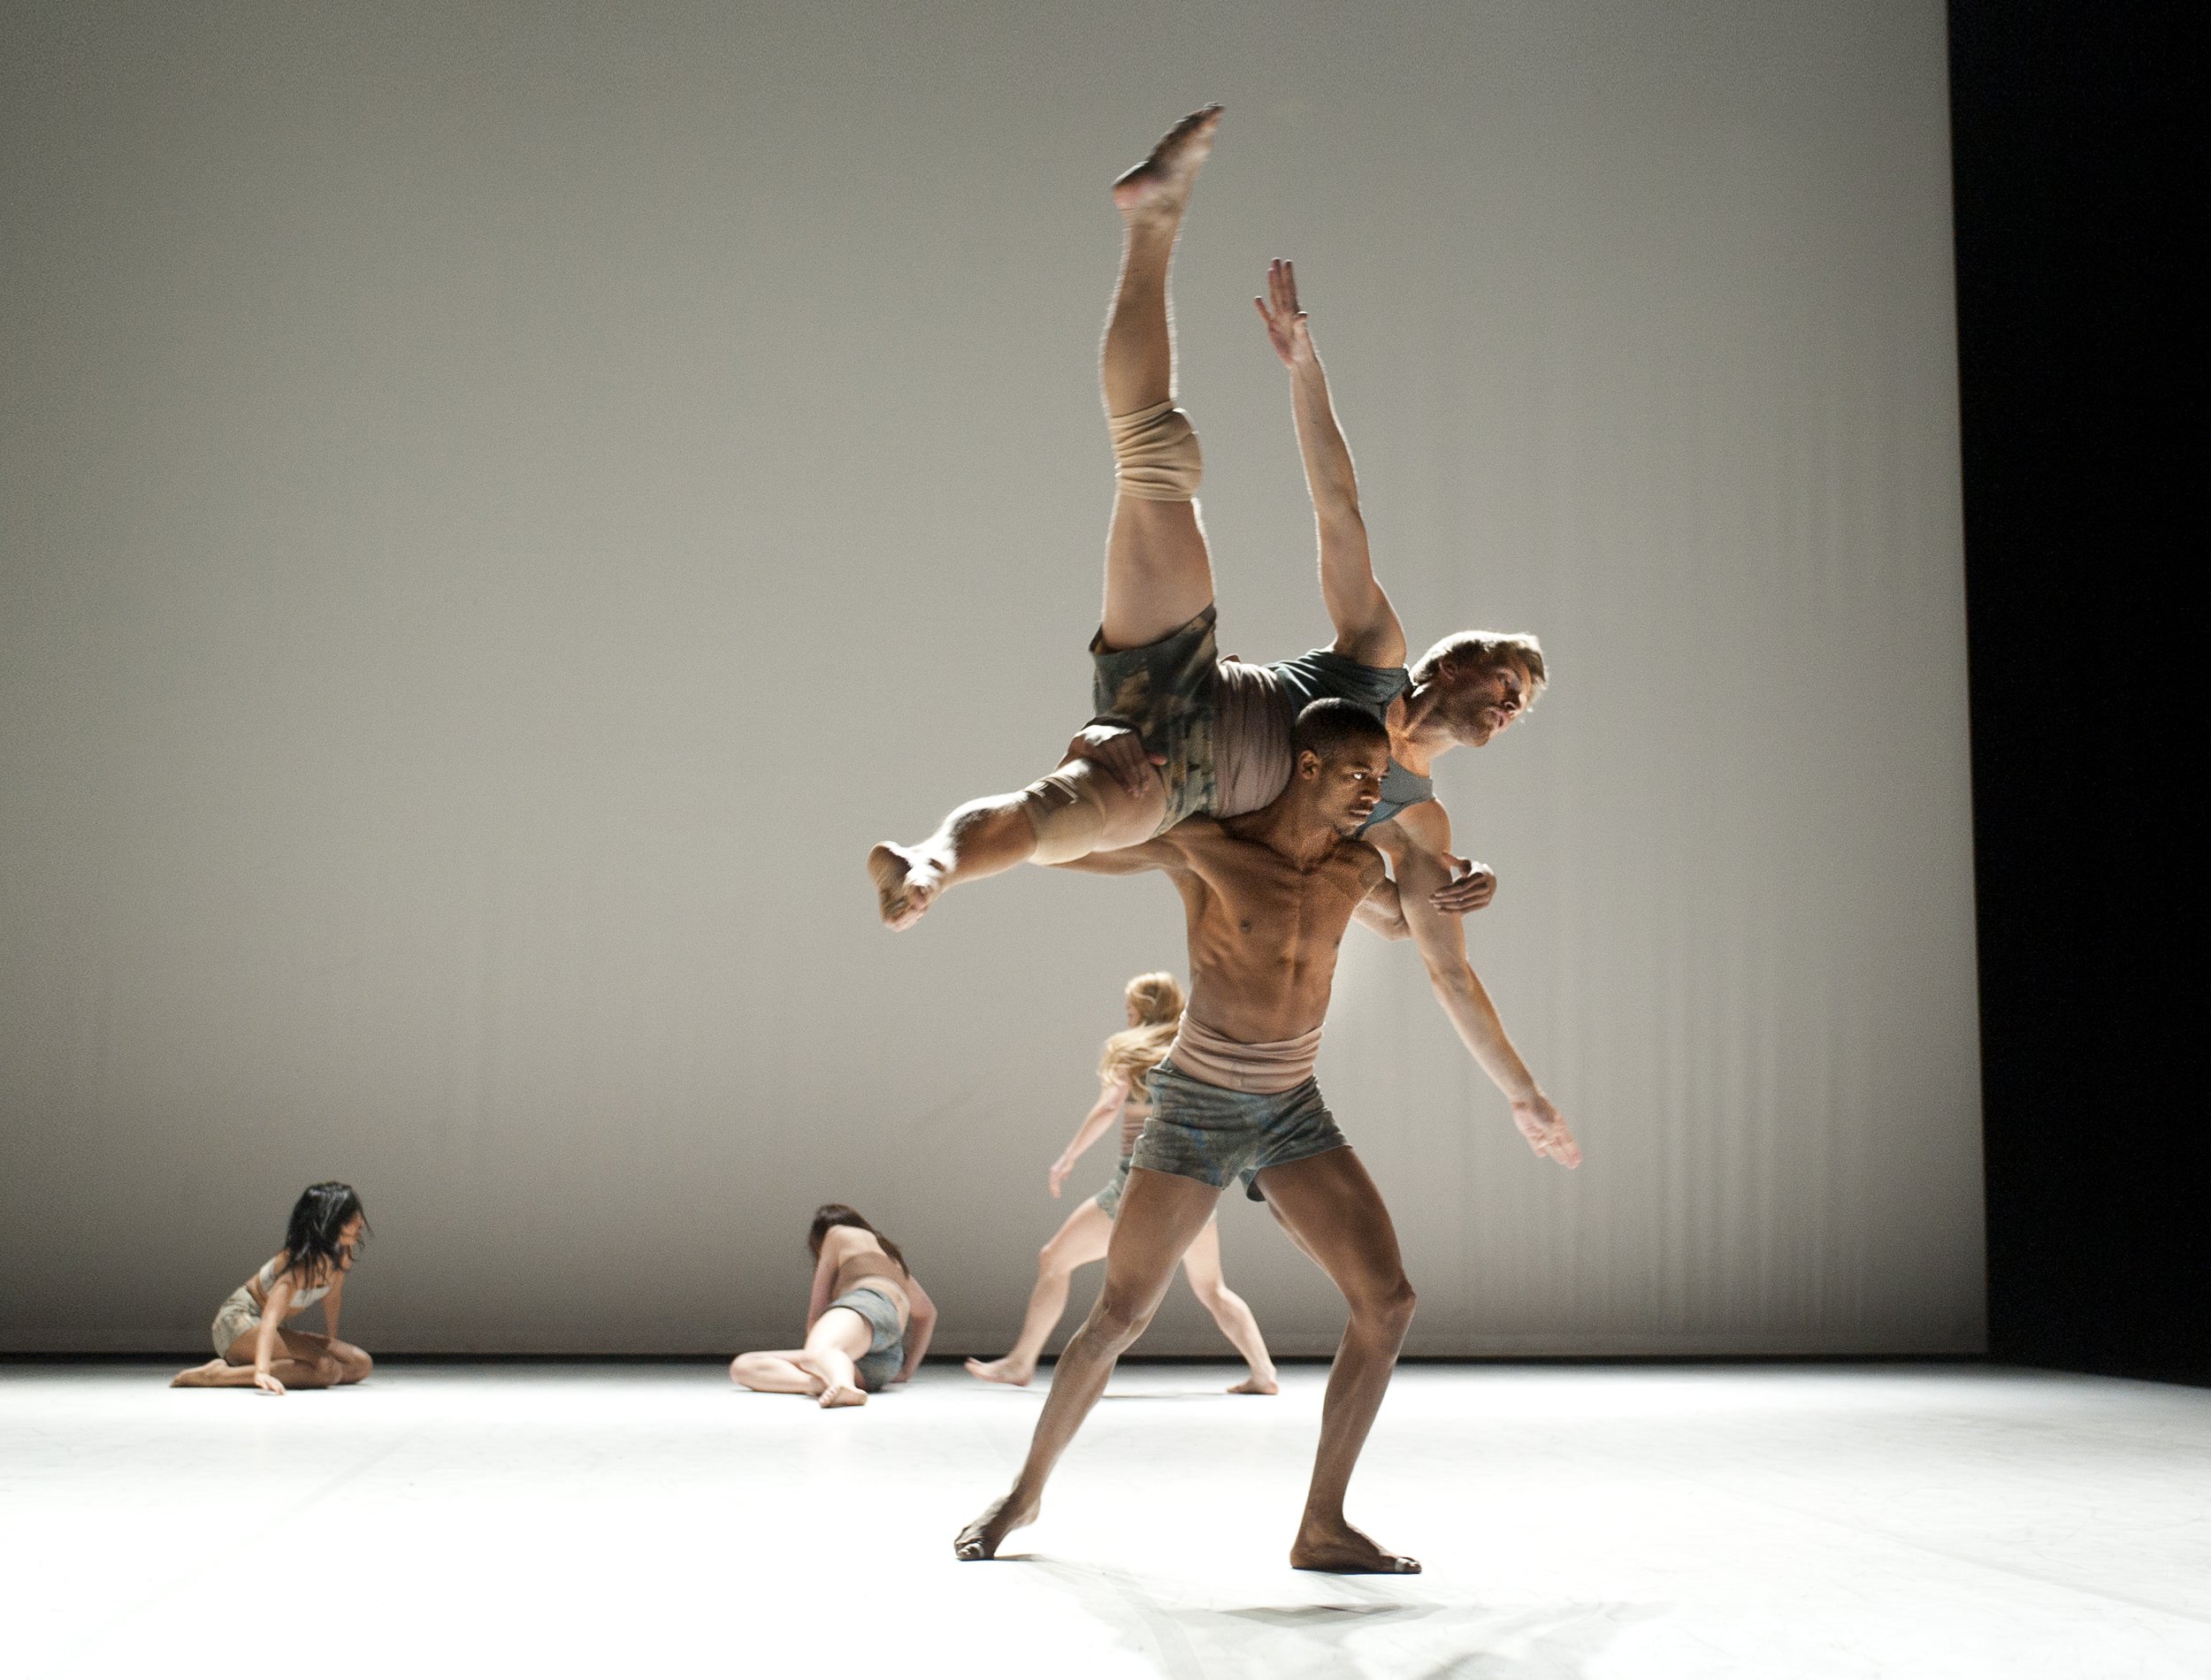 One dancer carries another dancer across both their shoulders.